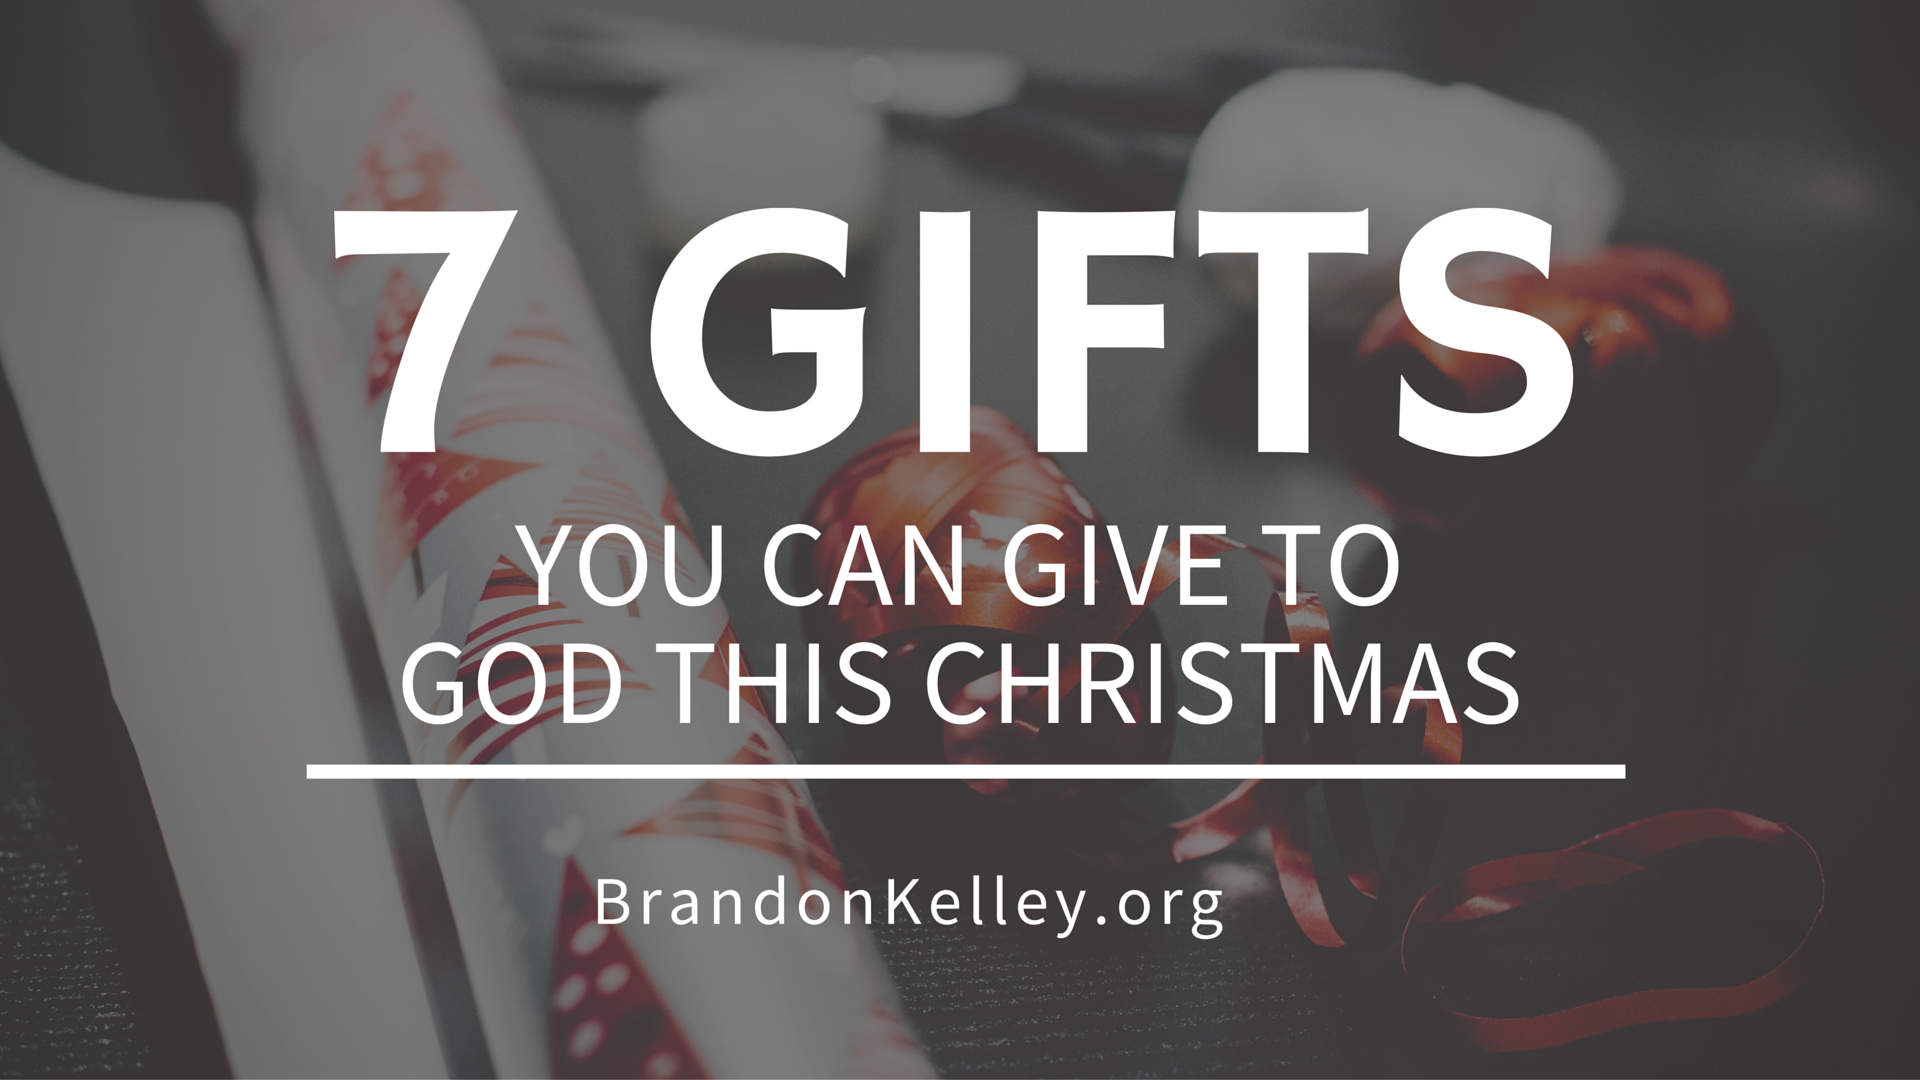 https://brandonkelley.org/wp-content/uploads/2015/12/7-Gifts-You-Can-Give-to-God-This-Christmas-1.png